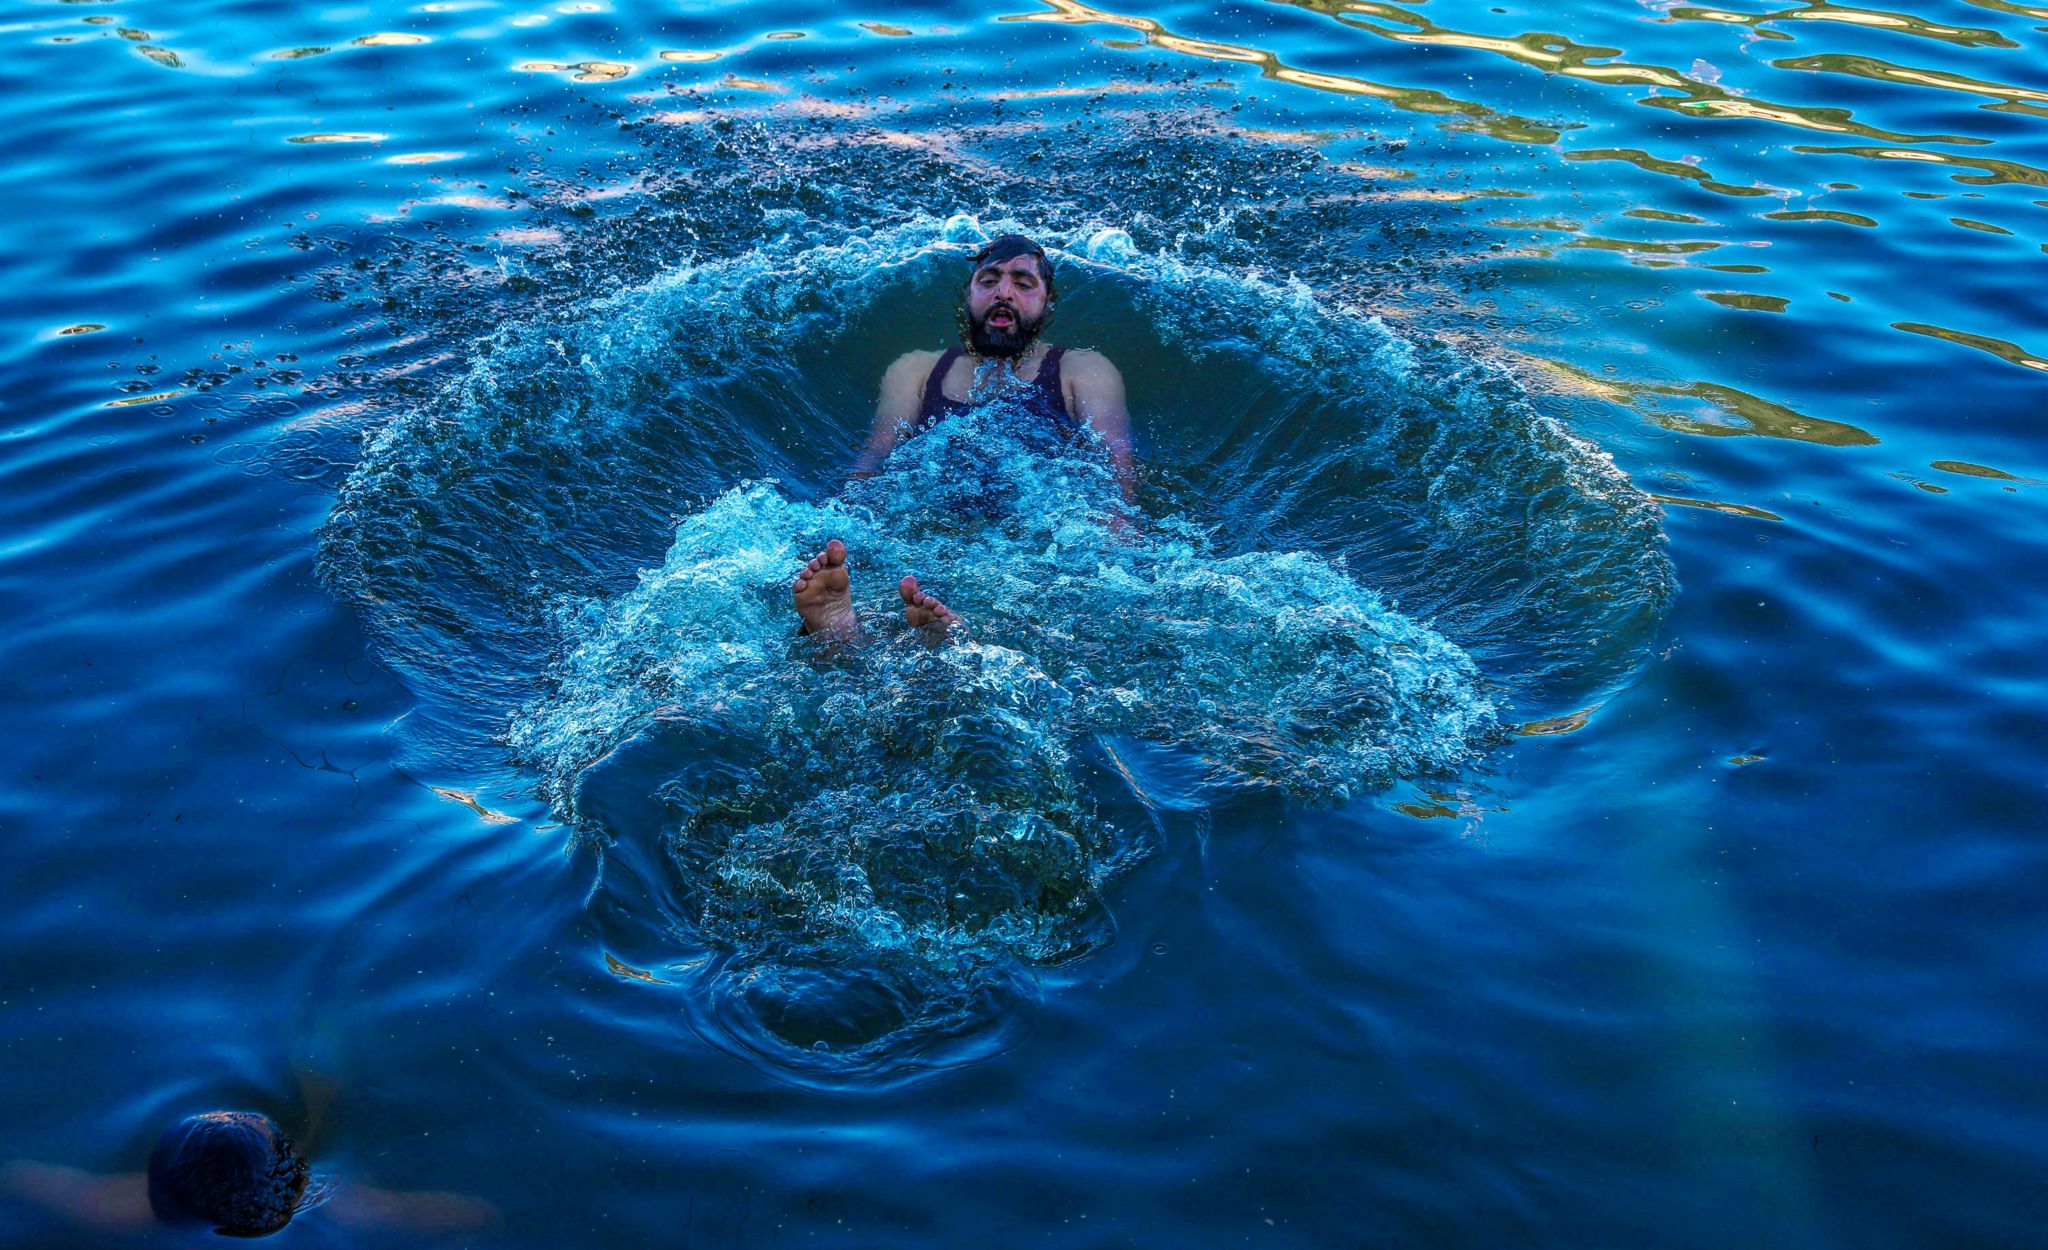 A Kashmiri man swims in waters of the Dal Lake to cool off during hot weather, in Srinagar, the summer capital of Indian Kashmir, 22 May 2024. Kashmir is witnessing above normal temperatures as the summer season gets underway. The local meteorological department has forecasted mainly dry and hot weather conditions until 28 May in the Himalayan region. Kashmir experiences hot weather conditions, Srinagar, India - 22 May 2024